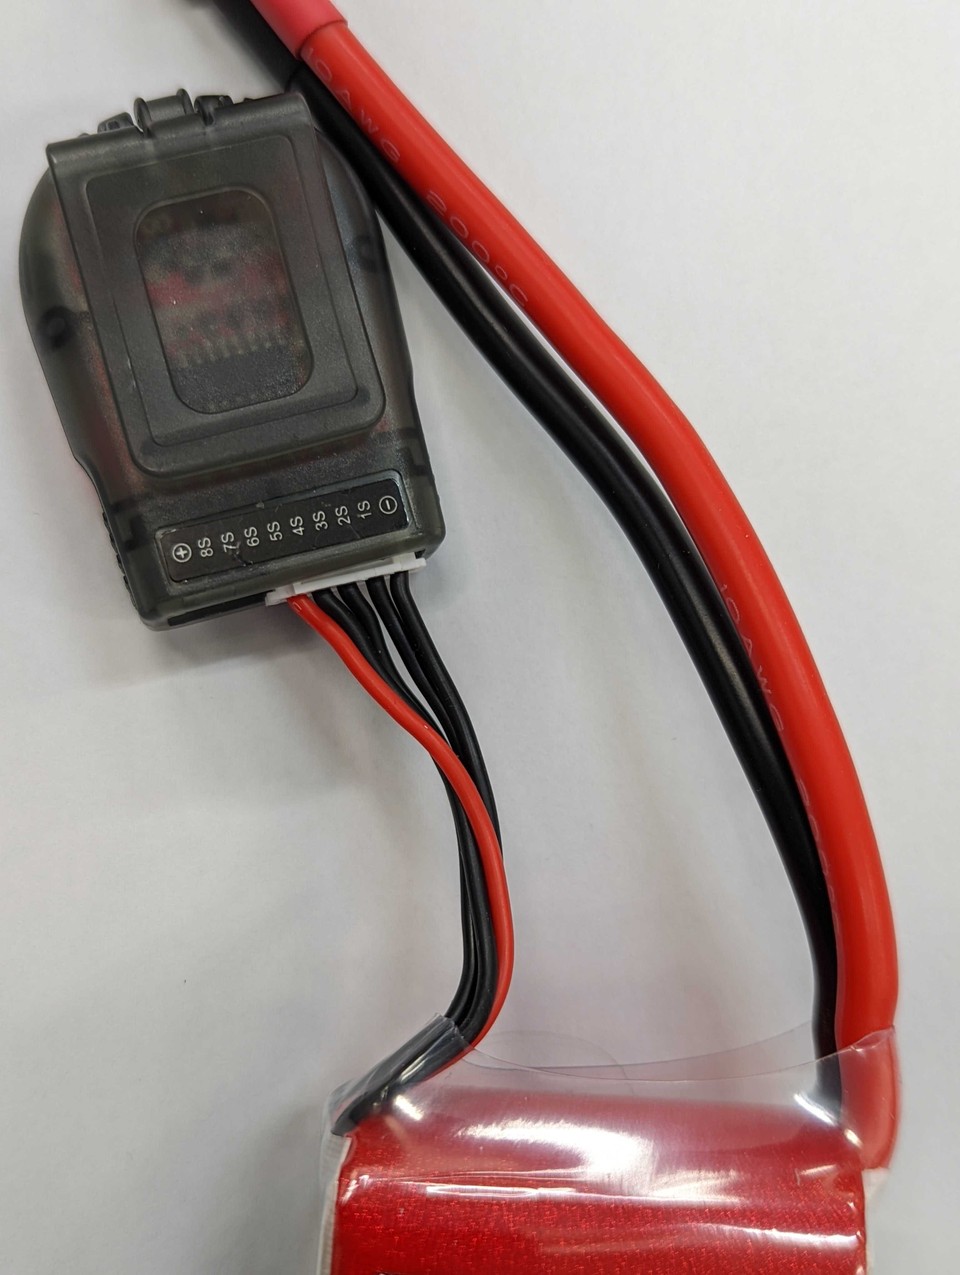 Battery monitor attached to a battery